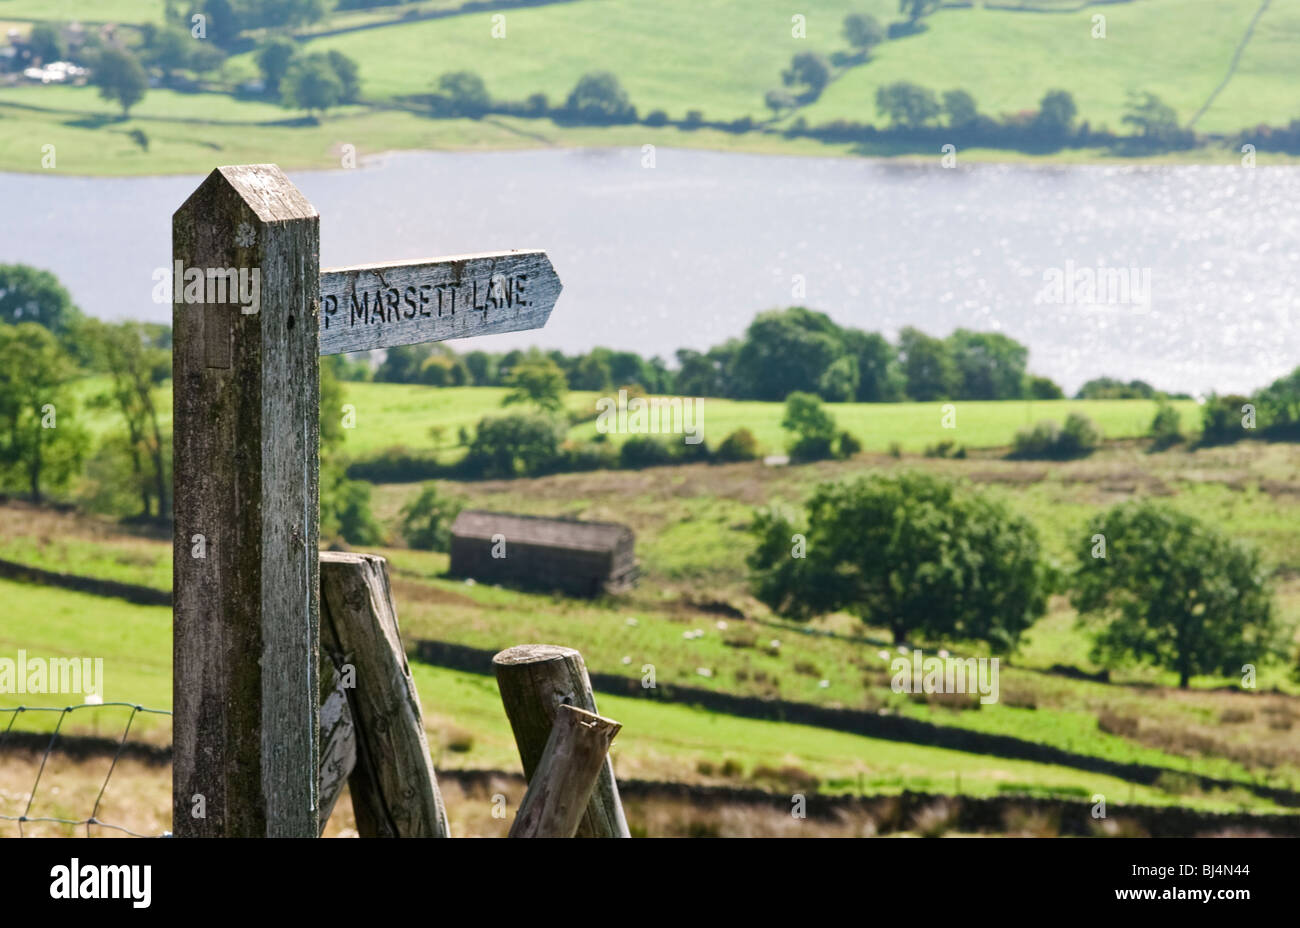 Wooden signpost at Semmerwater in Wensleydale in the Yorkshire Dales England UK selective focus Stock Photo